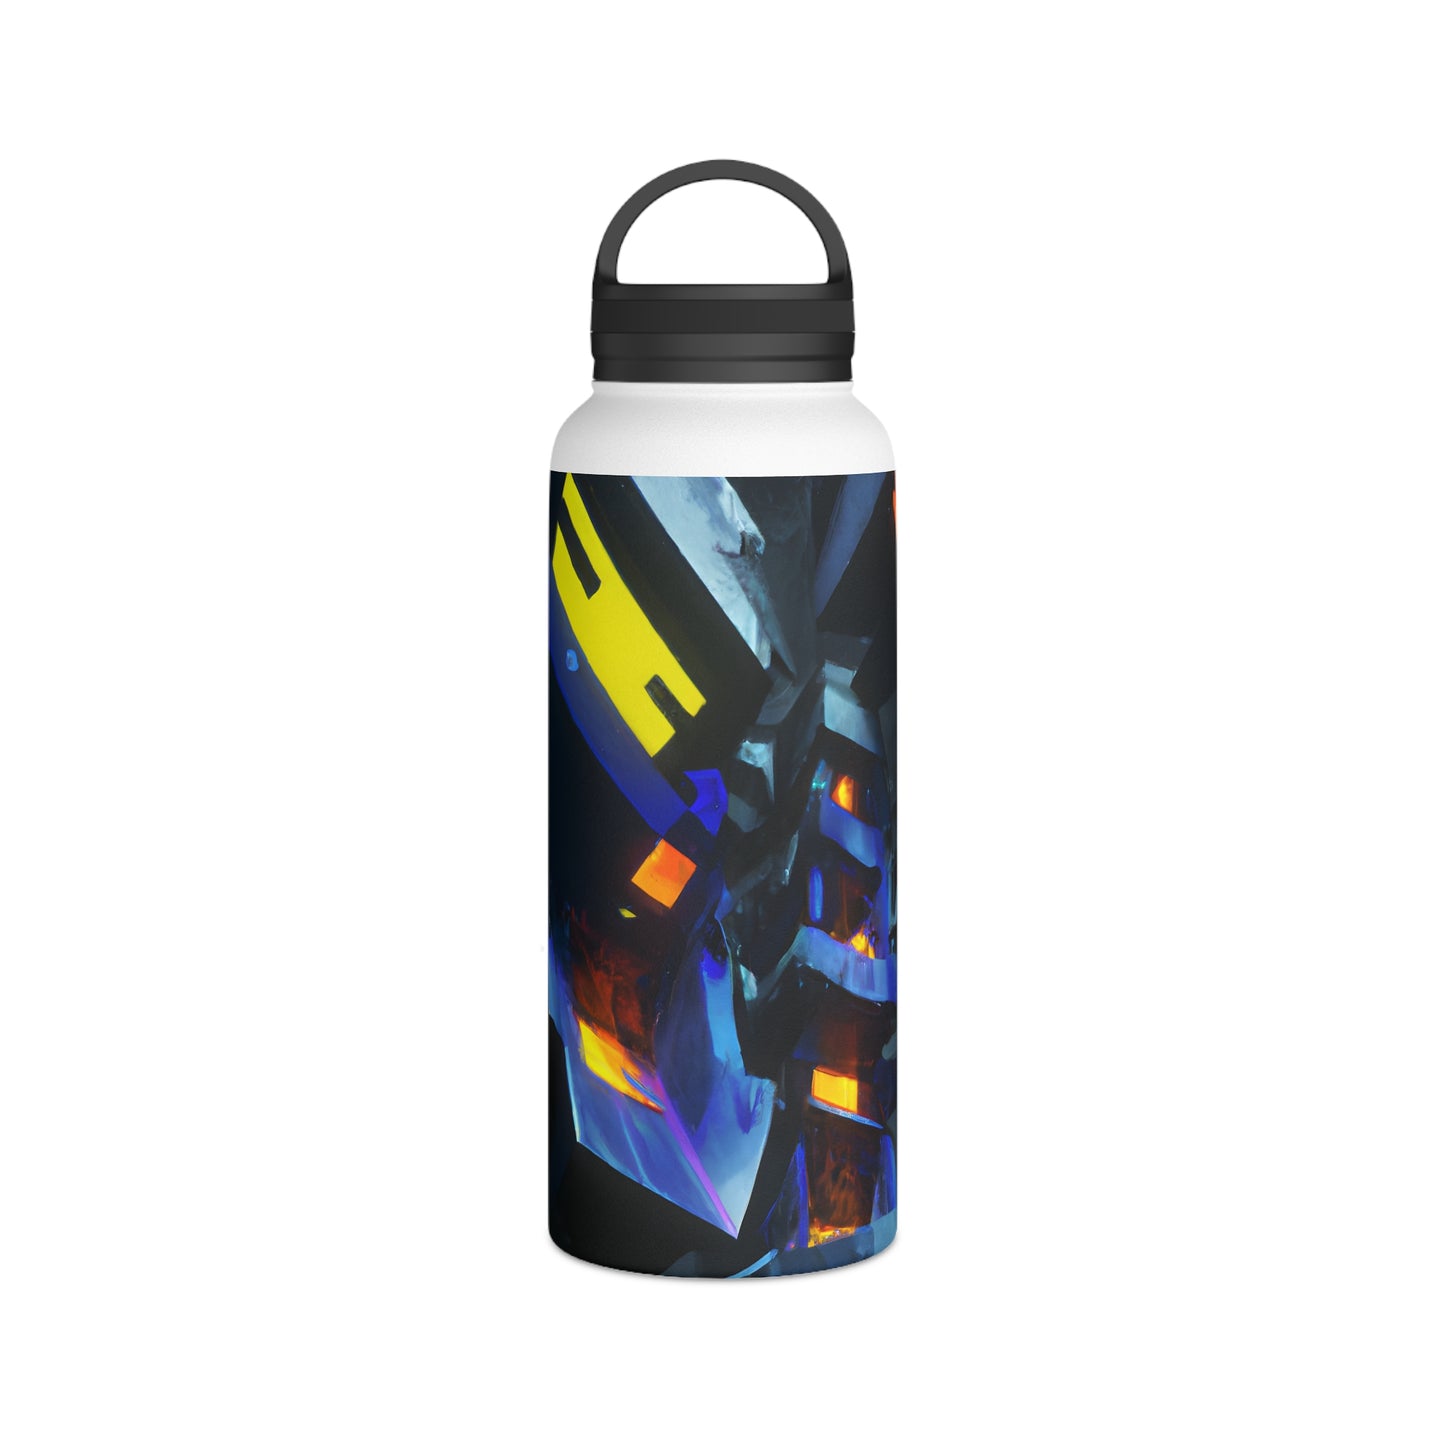 BluePeak Financial - Depreciation, Abstractly - Stainless Steel Water Bottle